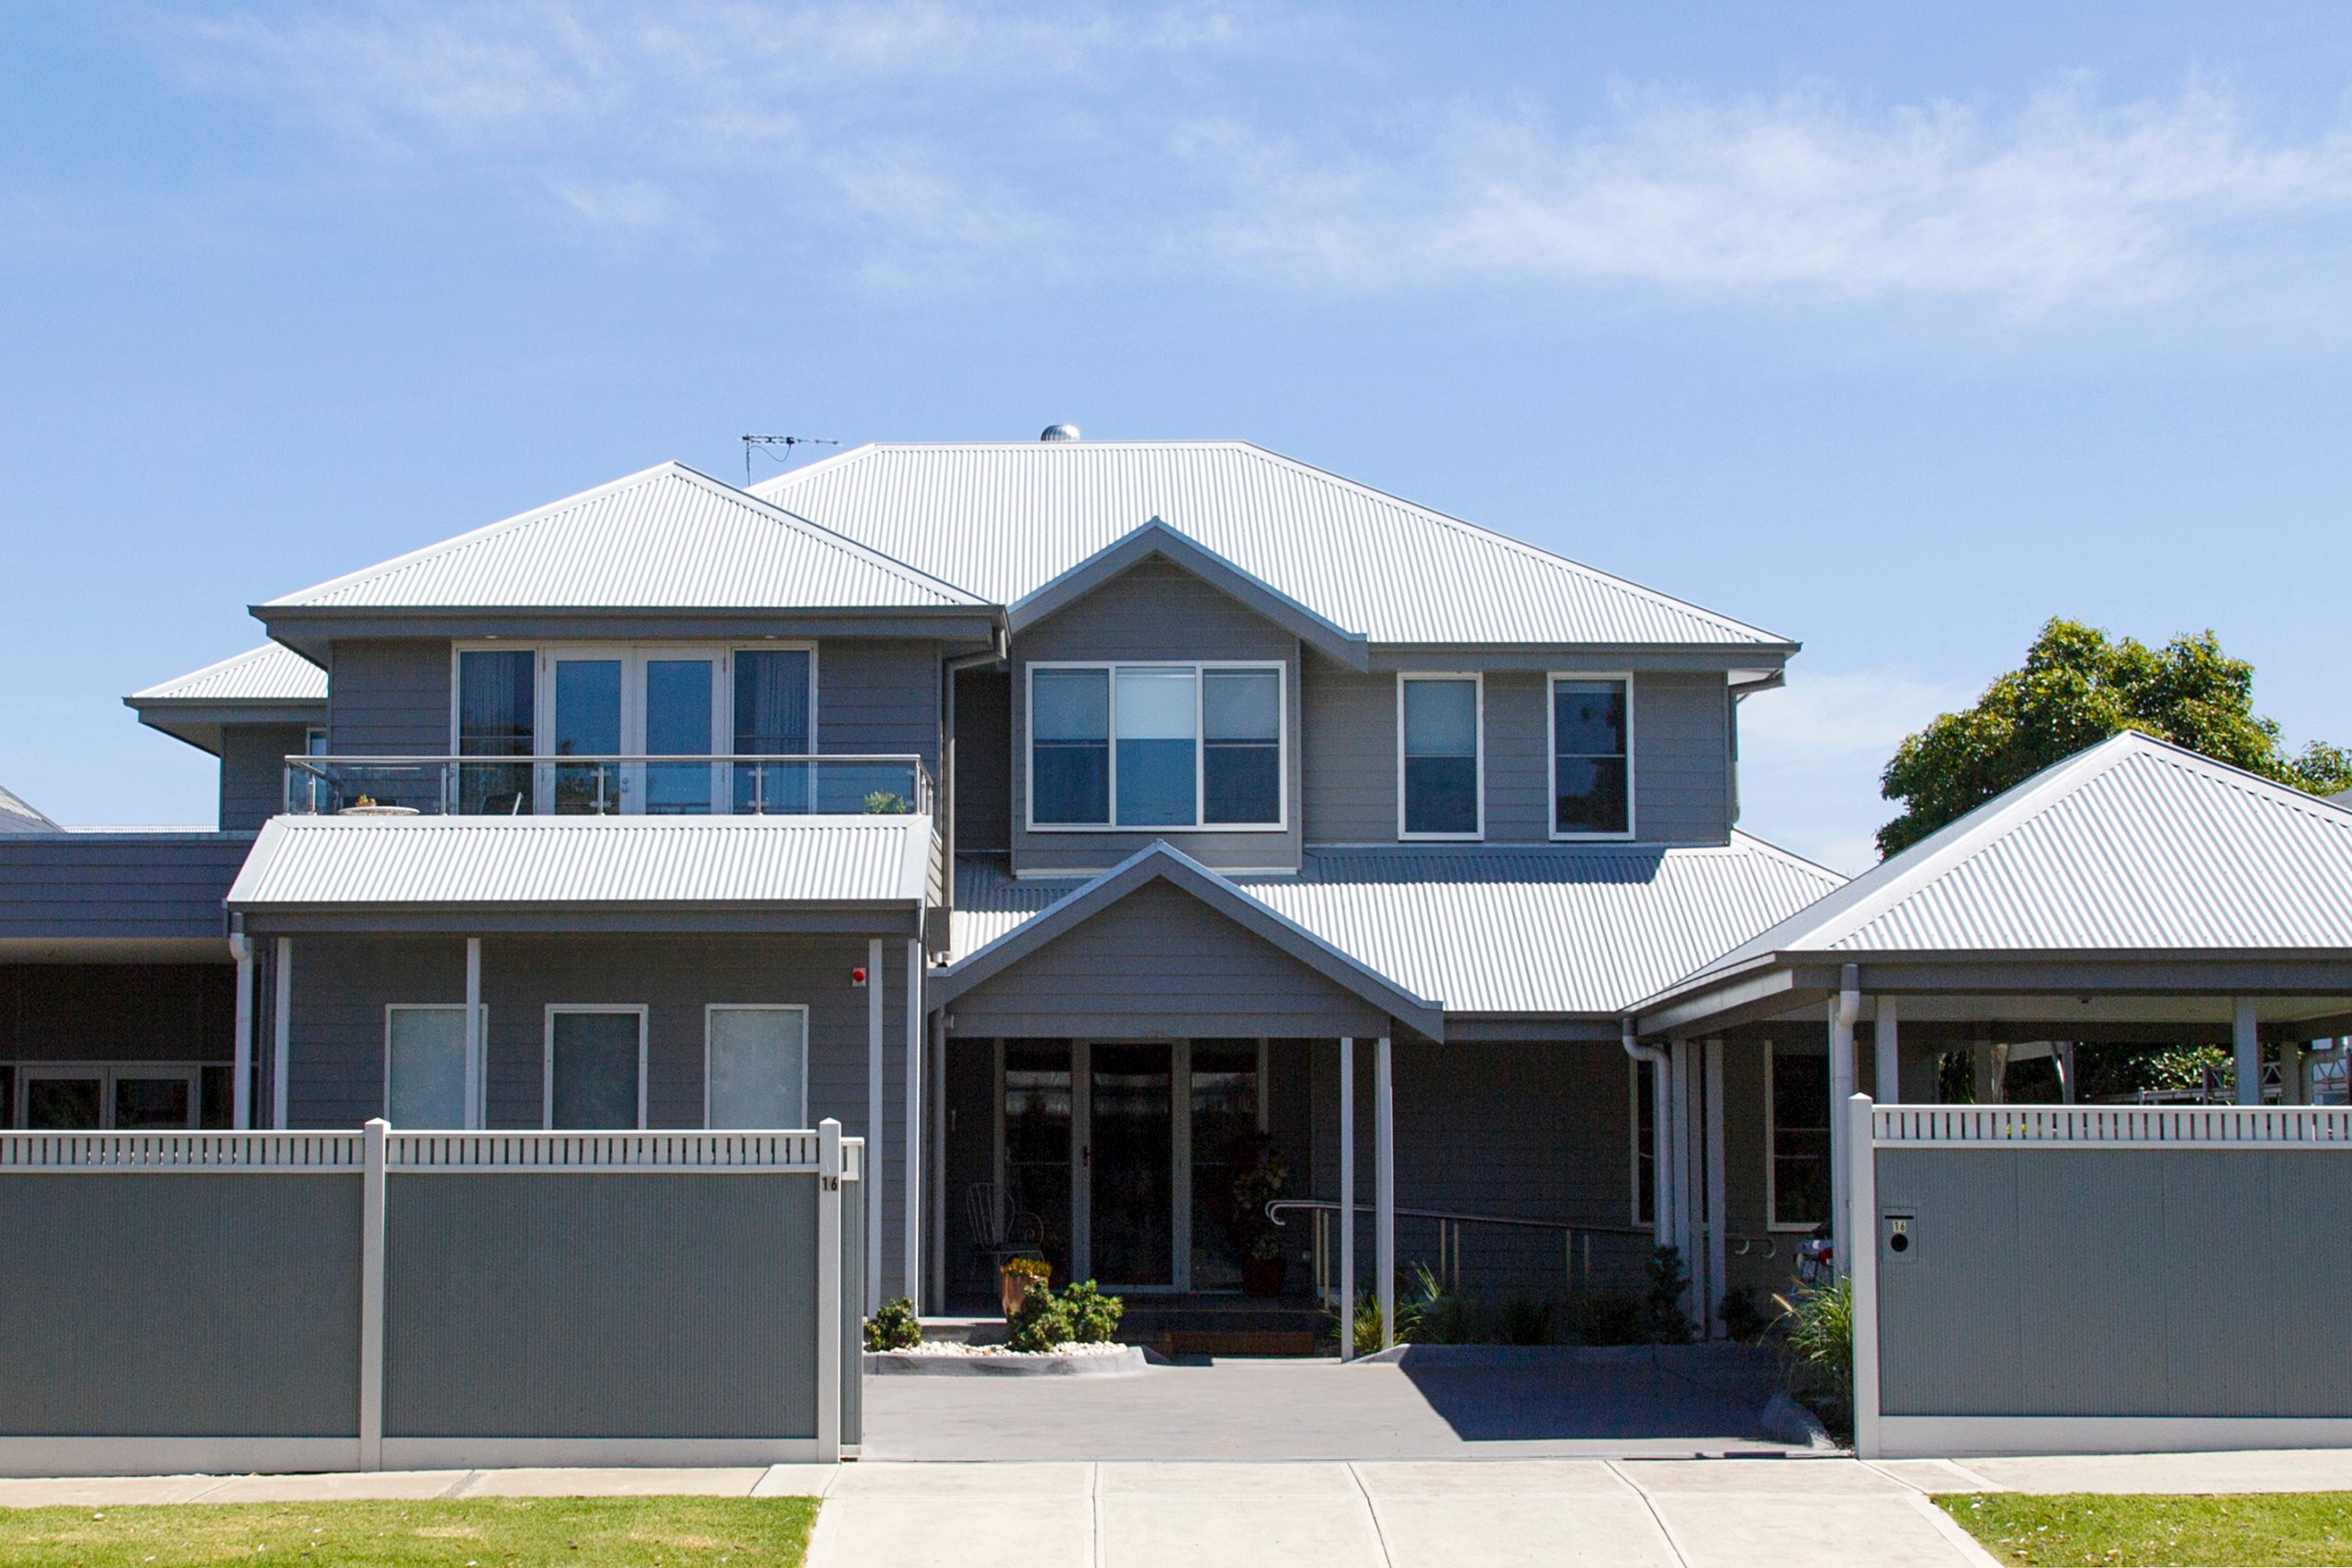 Melbourne,,australia:,march,07,,2019:,modern,large,,detached,house,in